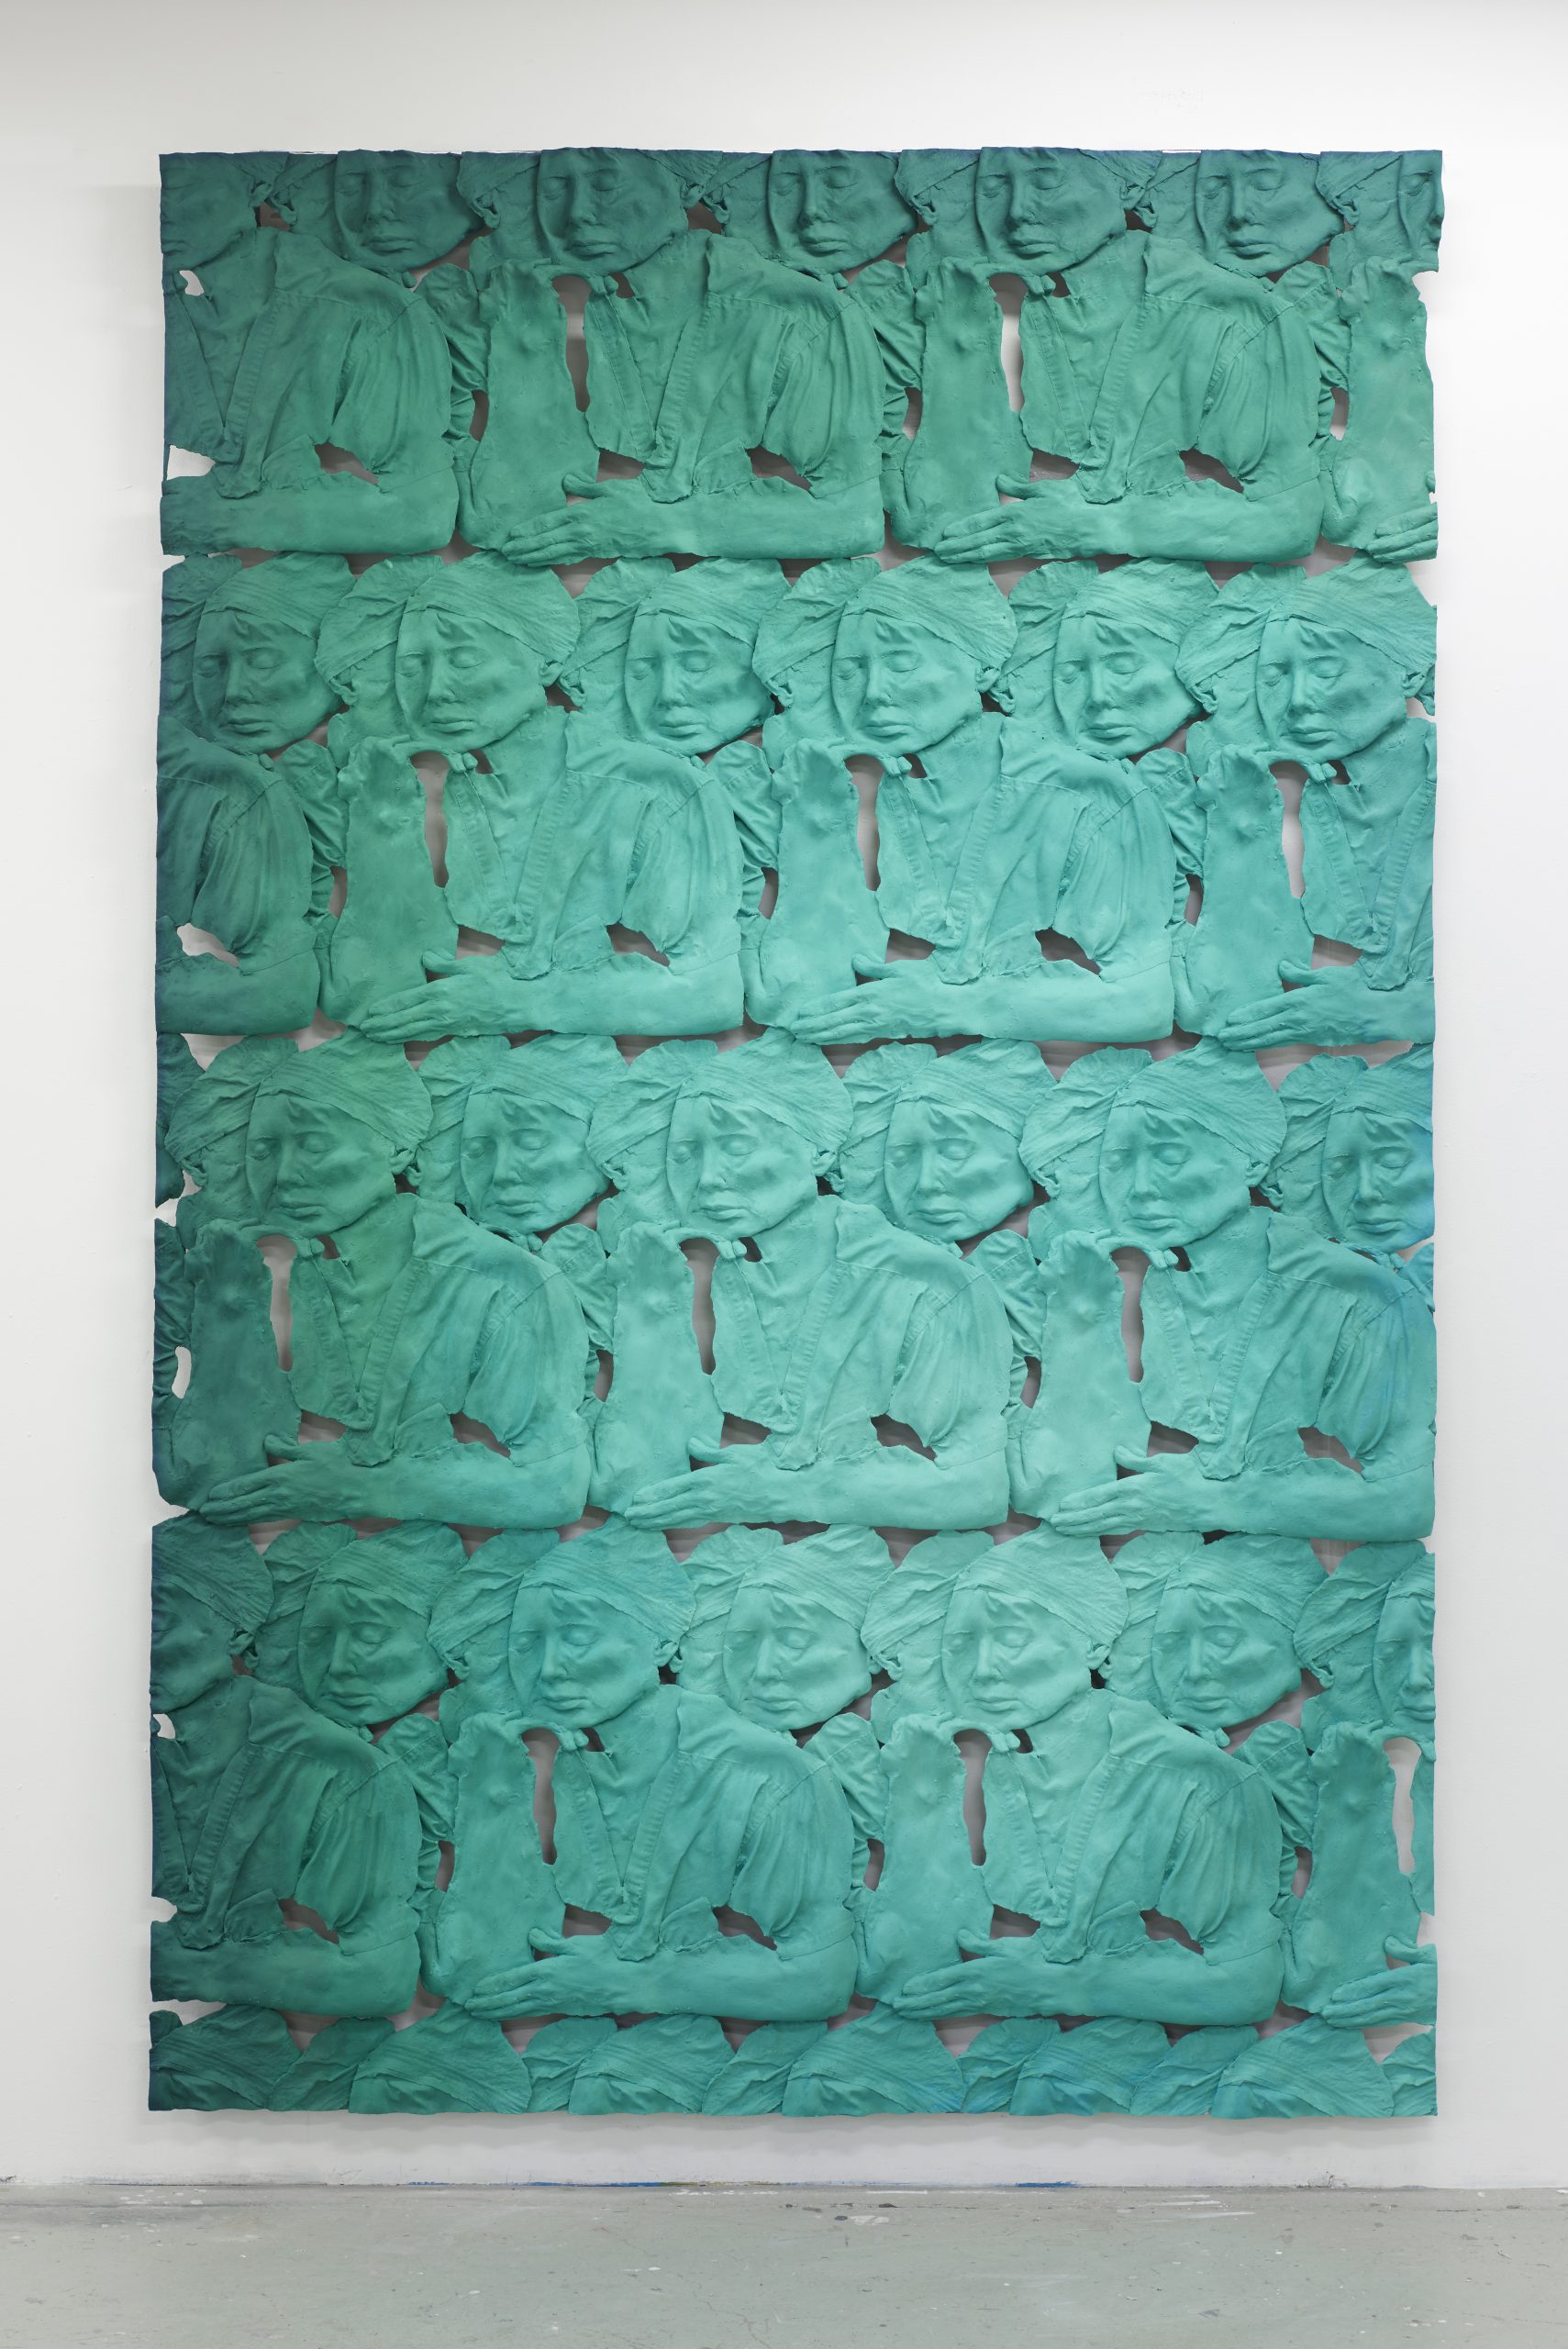 A sculpture of several dozen identical green plaster casts of a woman’s head and torso arranged in rows in a rectangular, vertically-oriented architectural frieze.